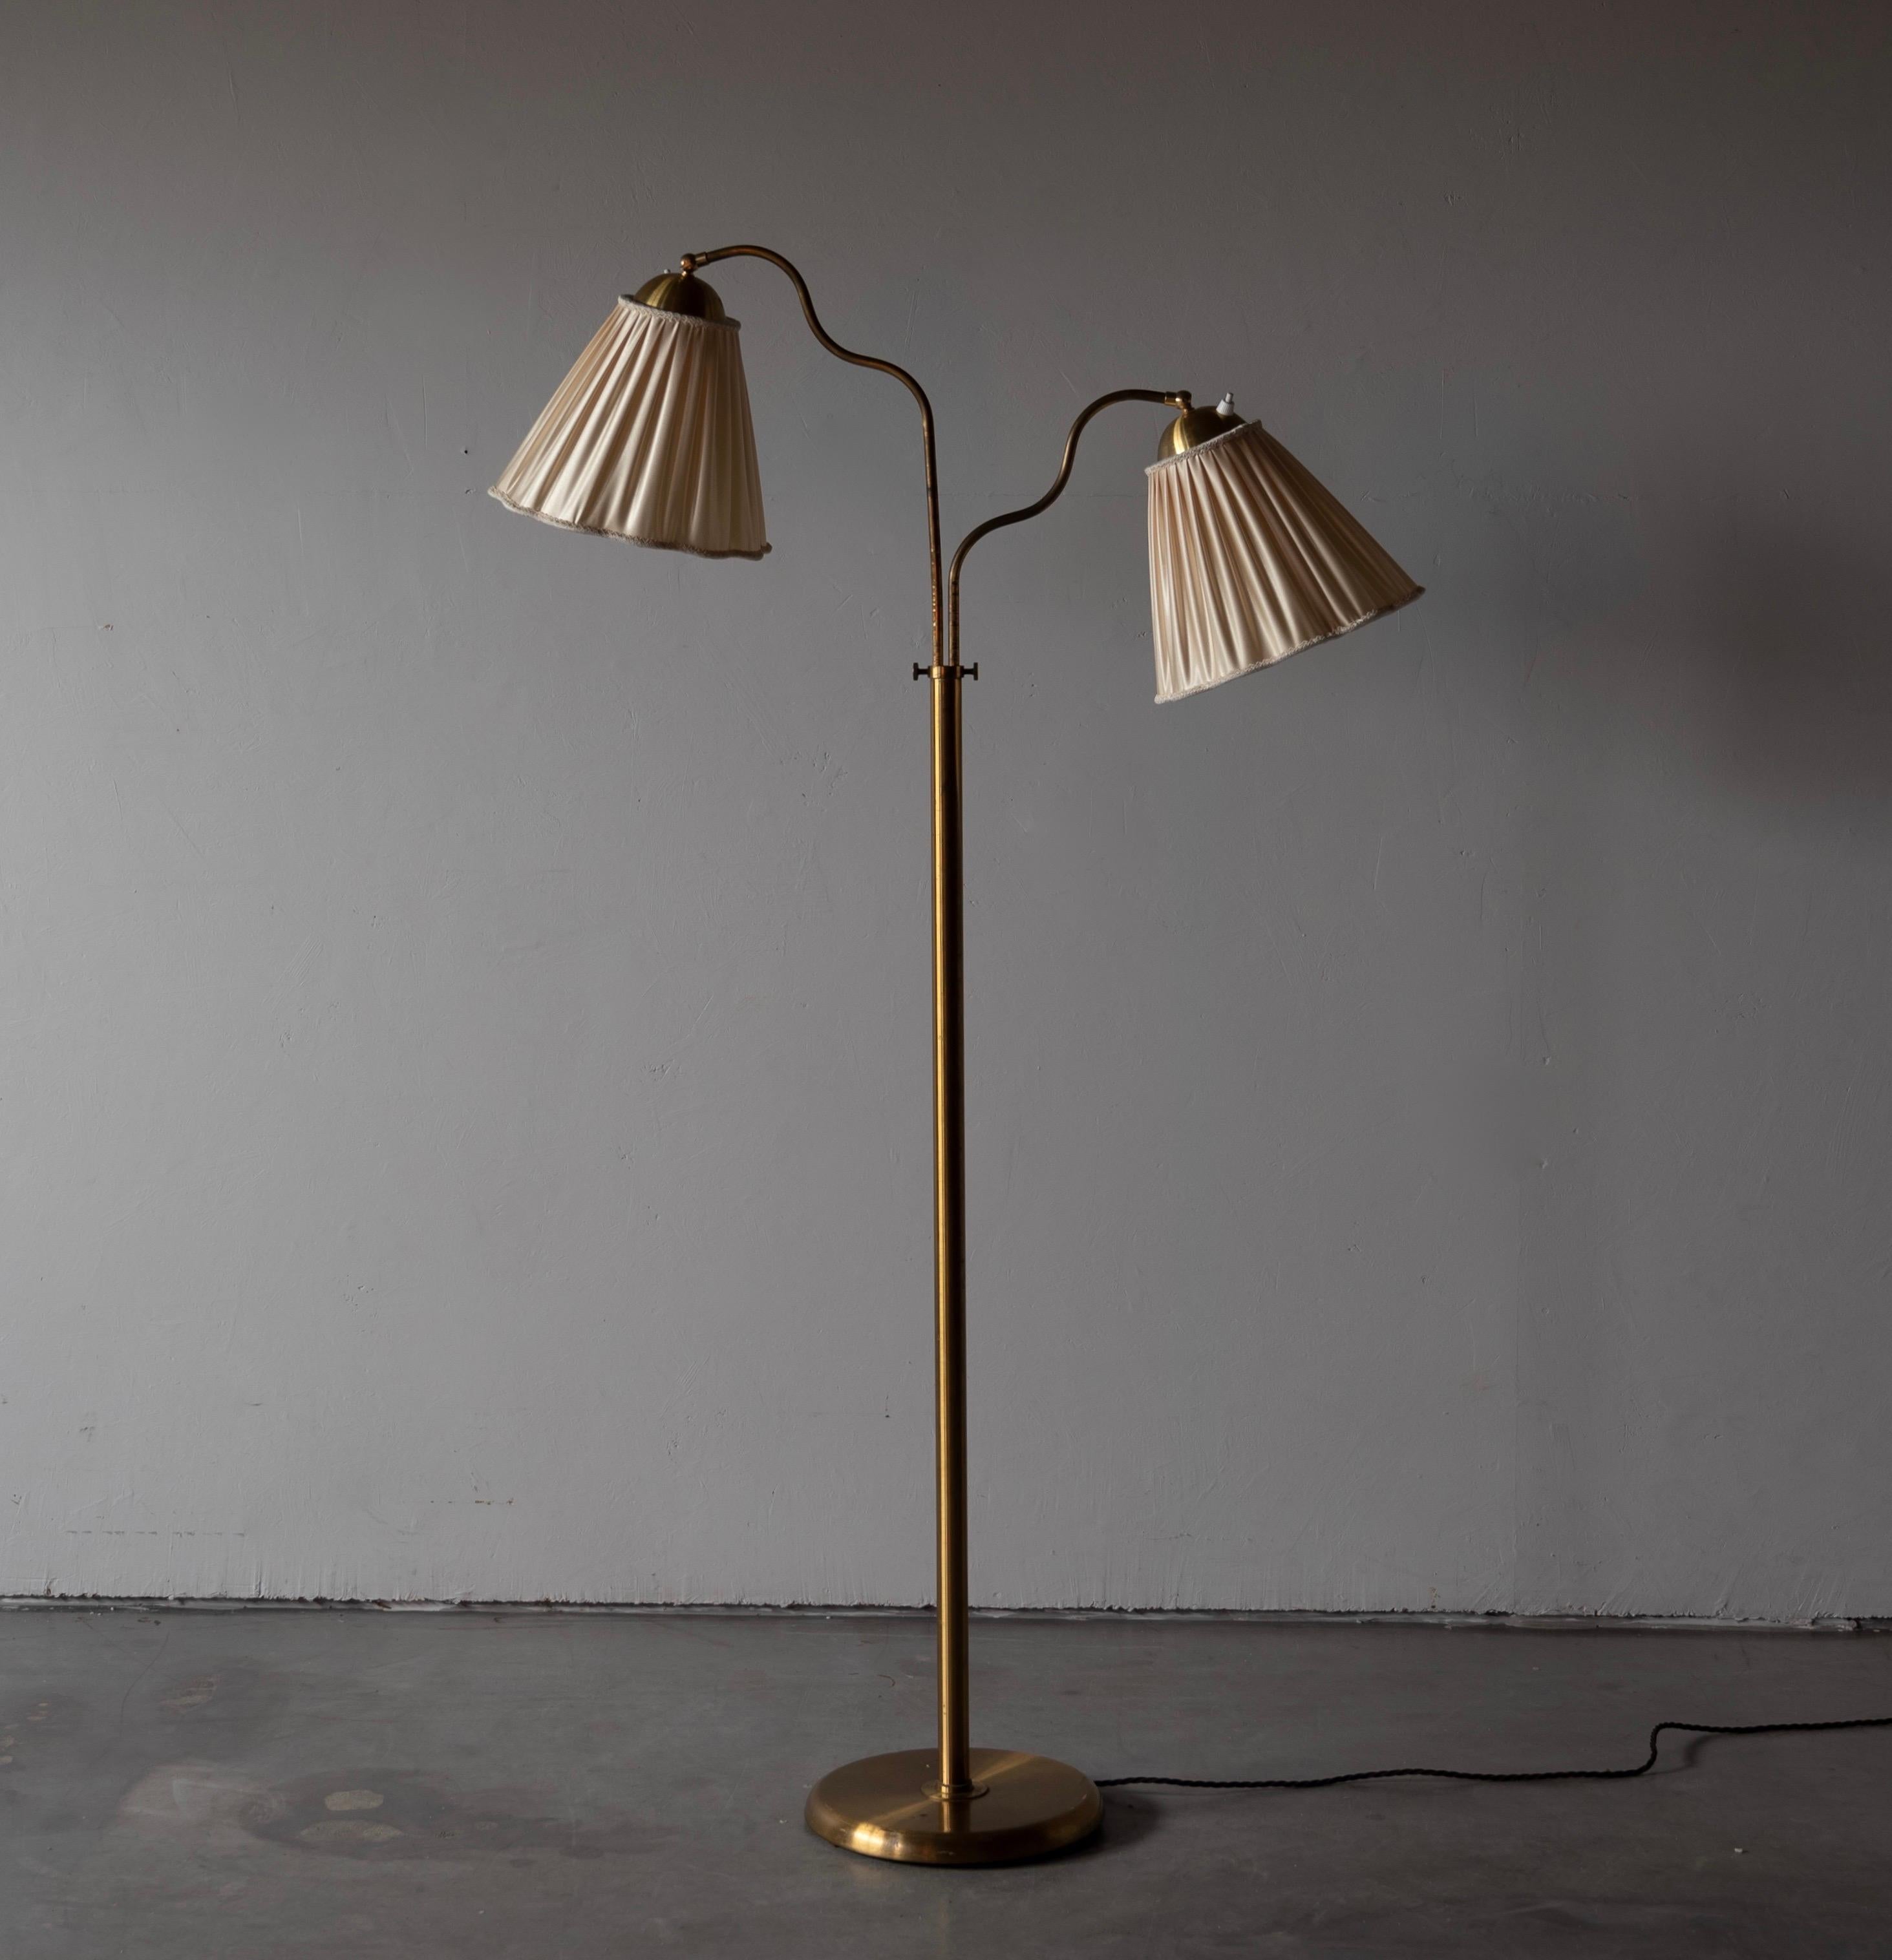 An adjustable two-armed floor lamp, designed and produced in Sweden, 1940s. brass. Brand new fabric lampshades.

Organic adjustable arm and rod, height adjustable. Brass is unpolished and has retained beautiful patina.

Other designers of the